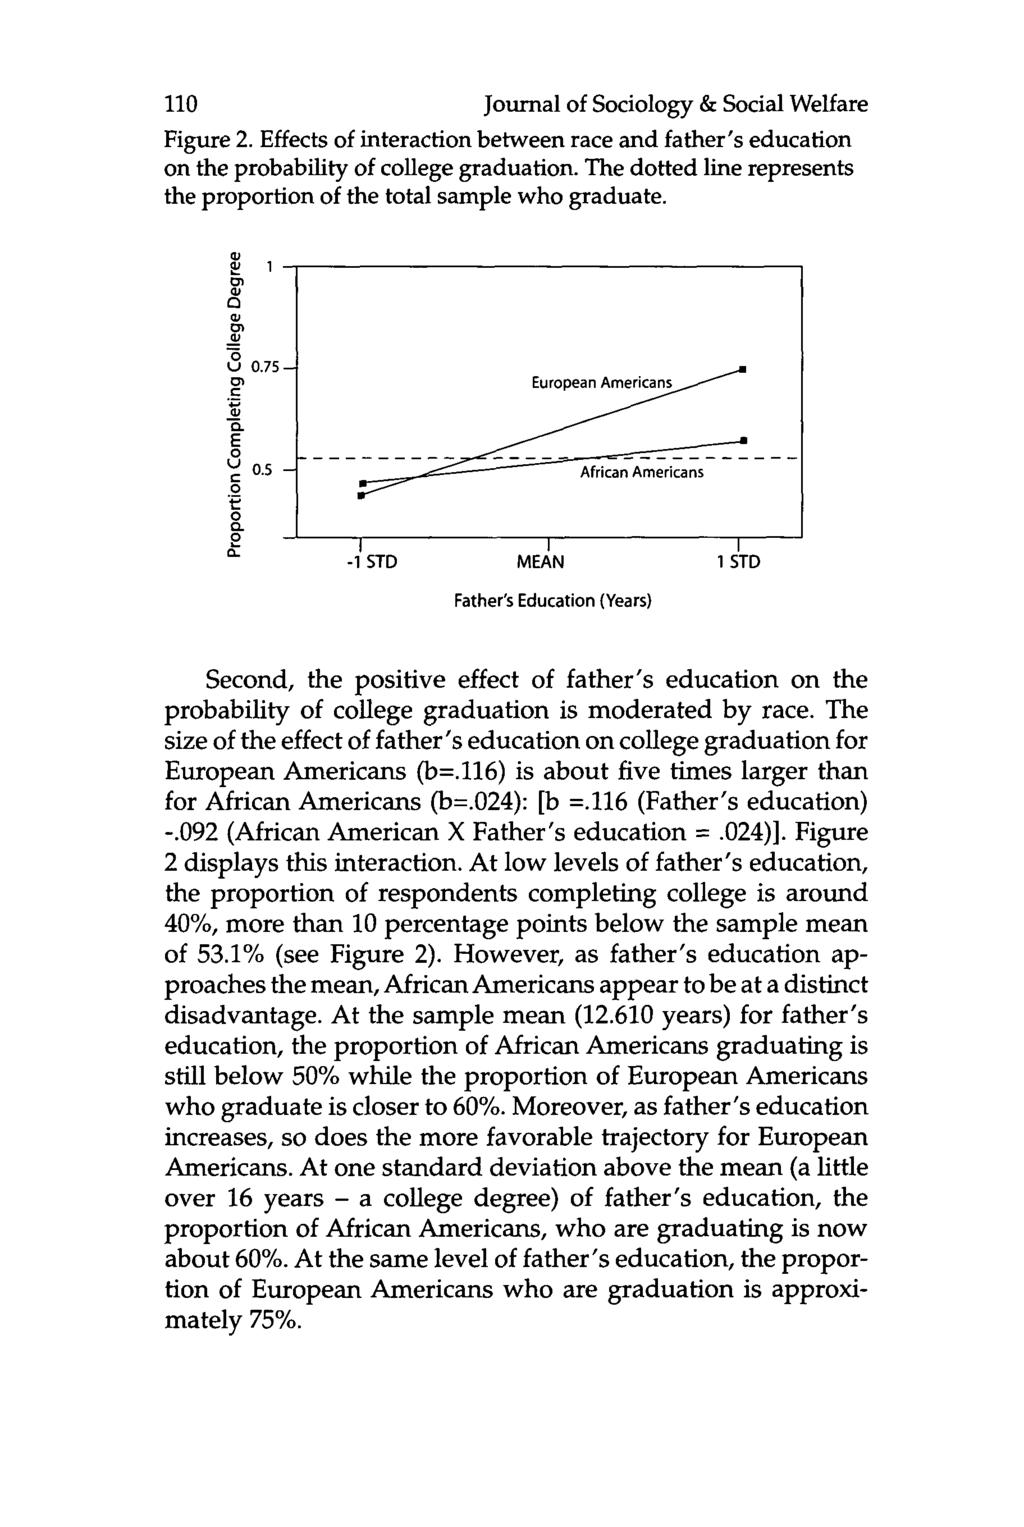 110 Journal of Sociology & Social Welfare Figure 2. Effects of interaction between race and father's education on the probability of college graduation.